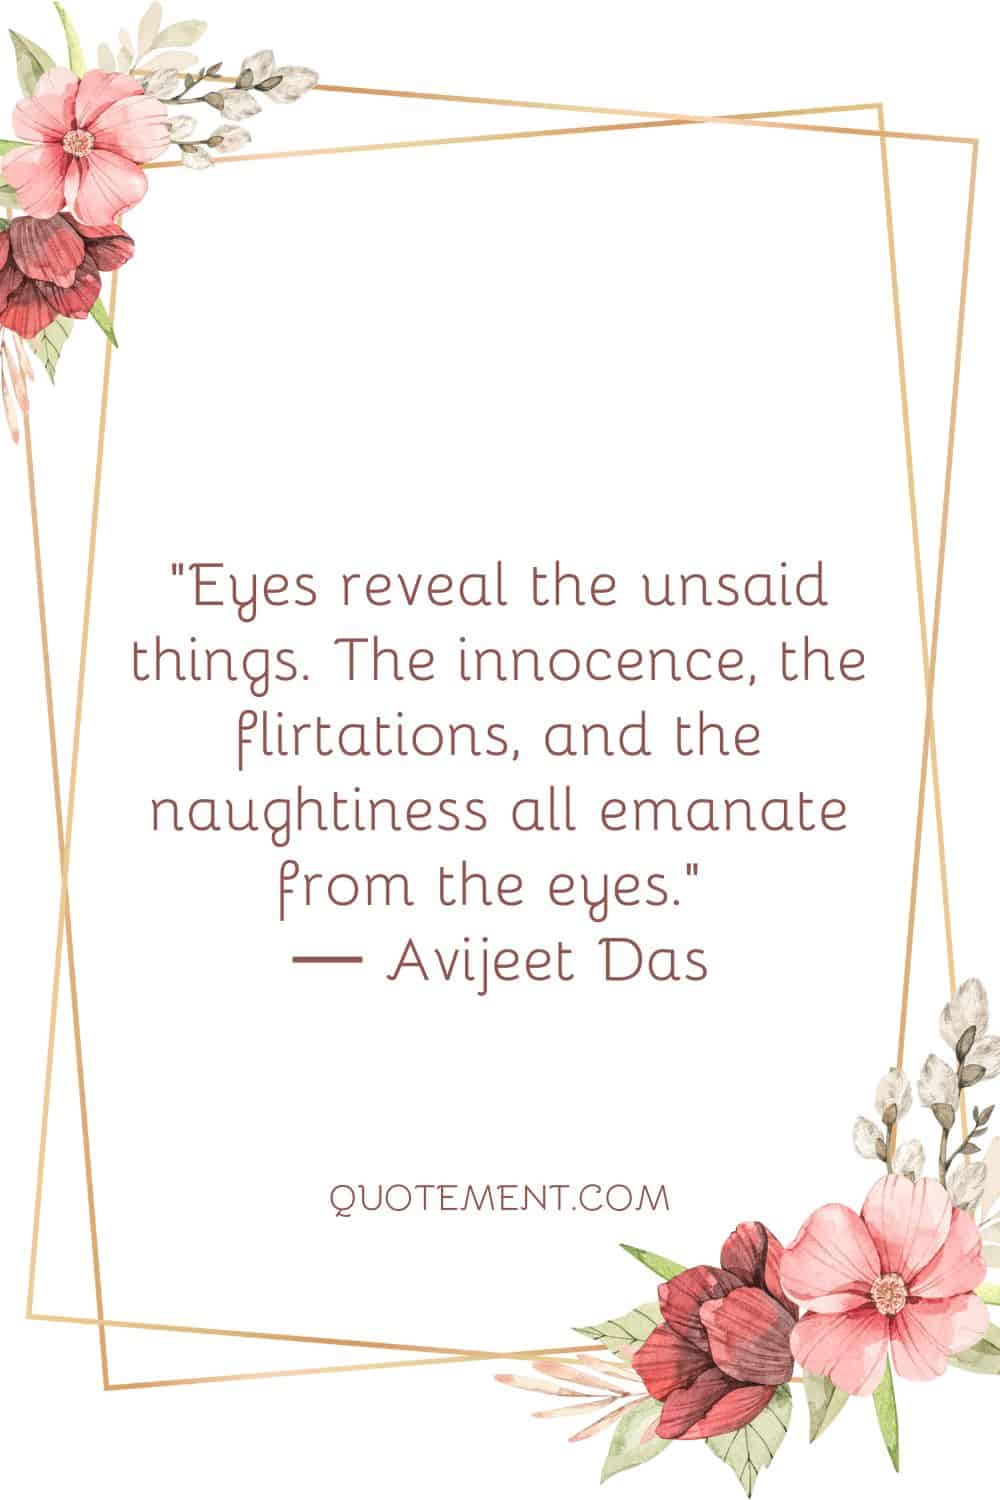 Eyes reveal the unsaid things